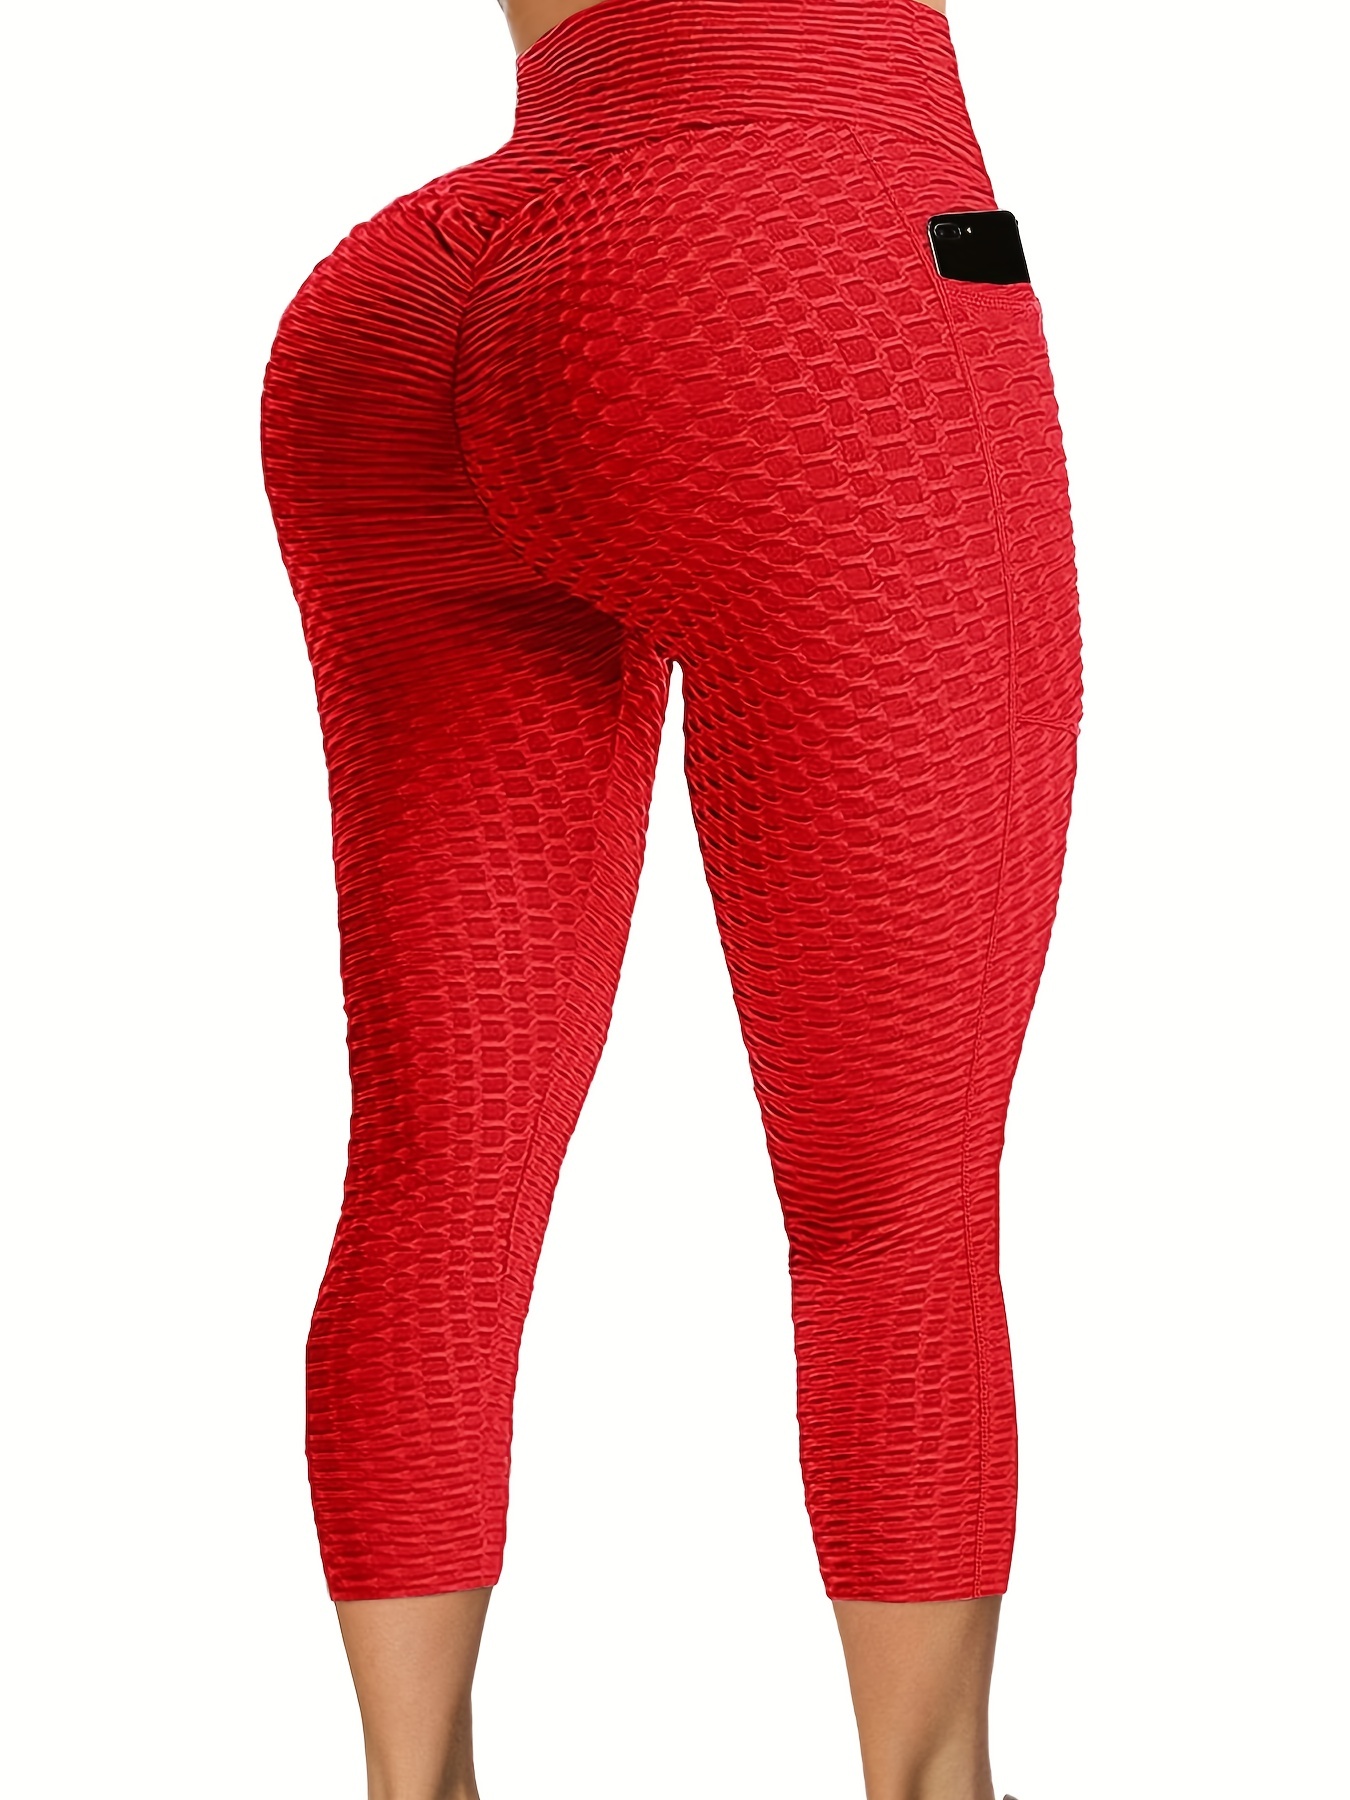 Women's High Waisted Ruched Yoga Pants Tummy Control Textured Leggings Butt  Lifting Anti Cellulite Stretchy Tights 